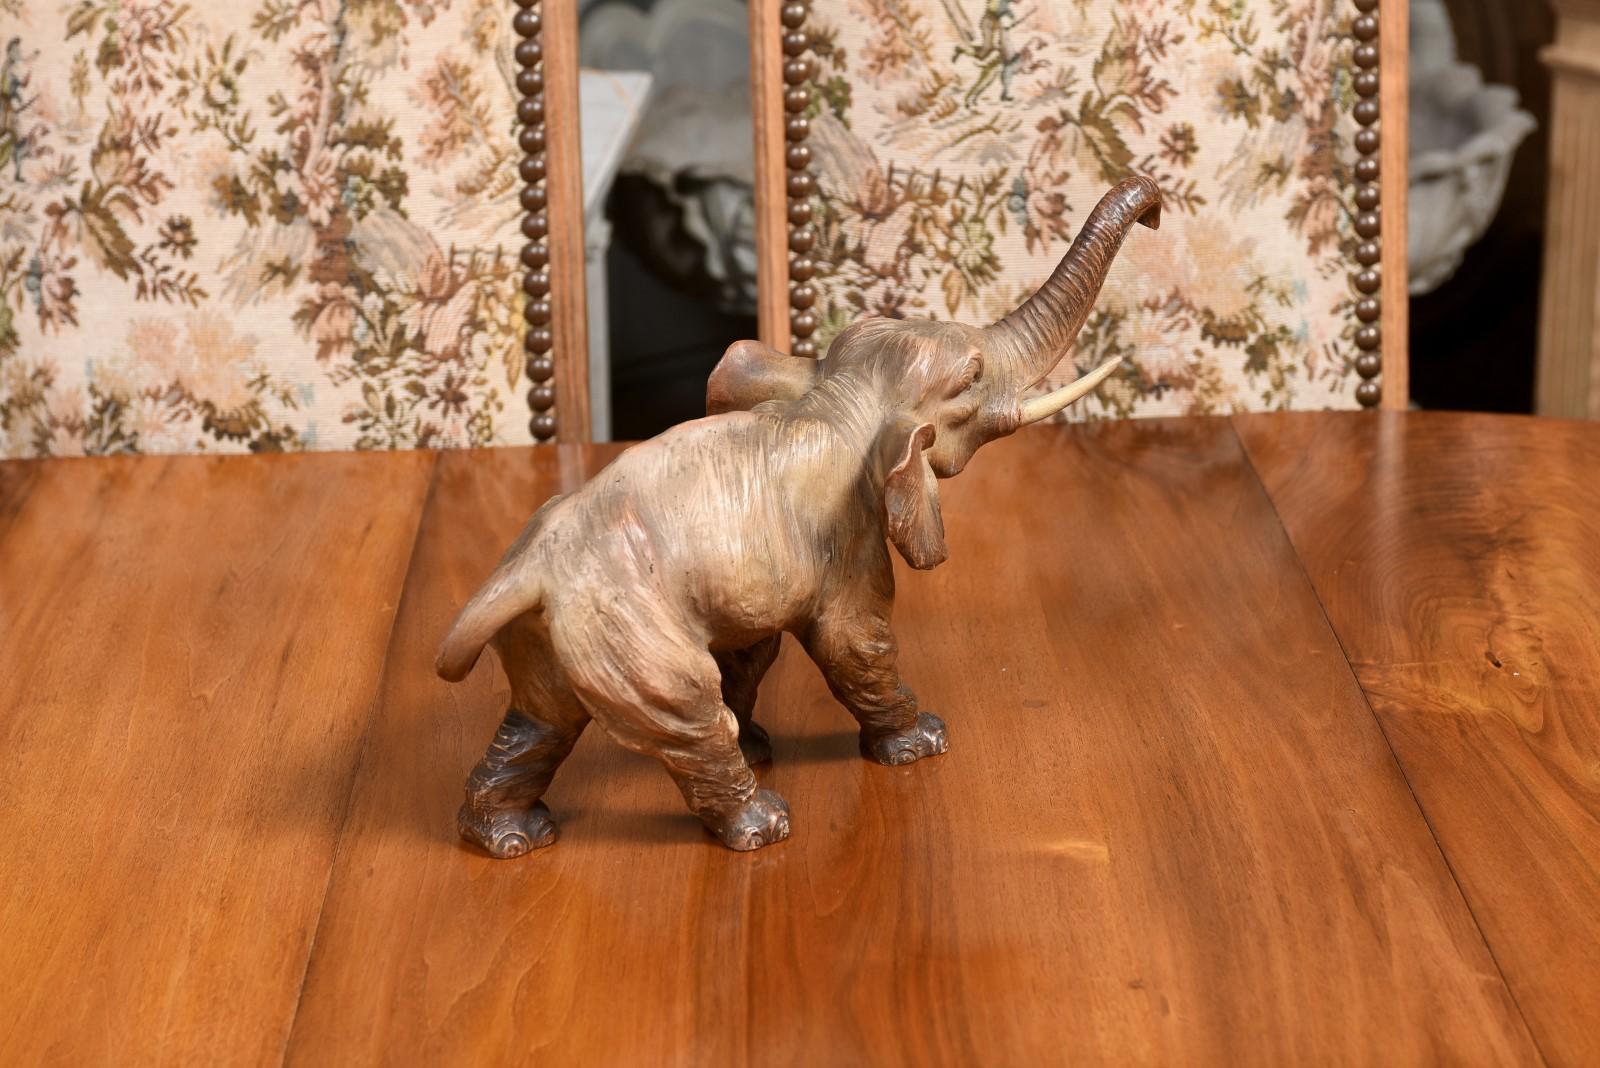 French 19th Century Terracotta Sculpture Depicting a Walking Asian Elephant 1